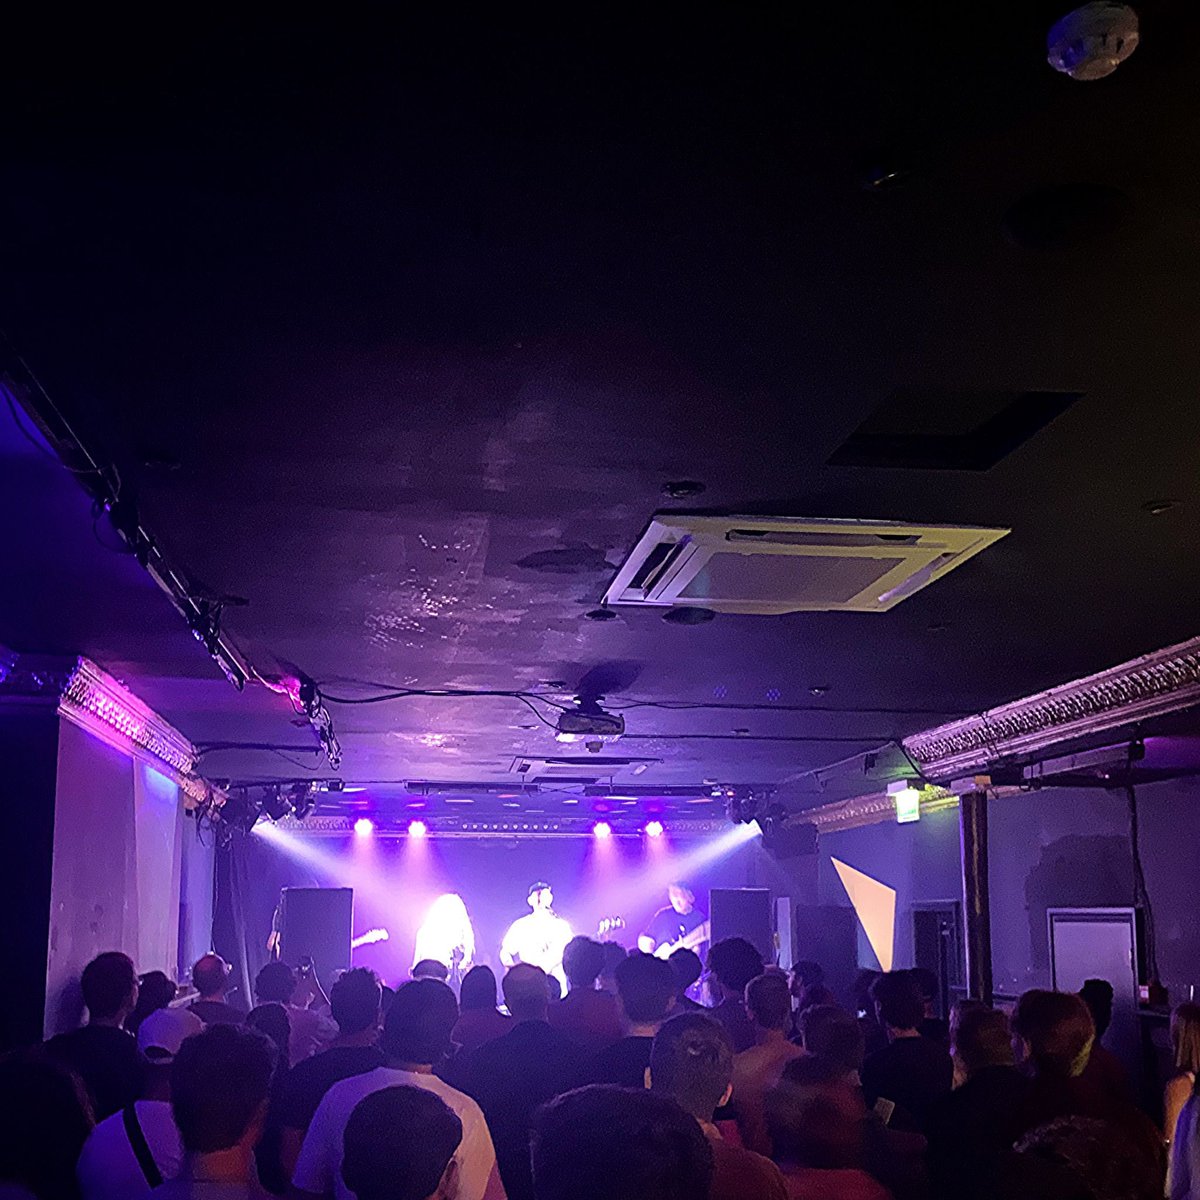 London, that was lovely! Thanks for coming out to see us and @Orchardslive last night! Big vibes! 💃🏼 Tonight we play @CourtyardHoxton with @puptheband and it’s going to be top drawer!